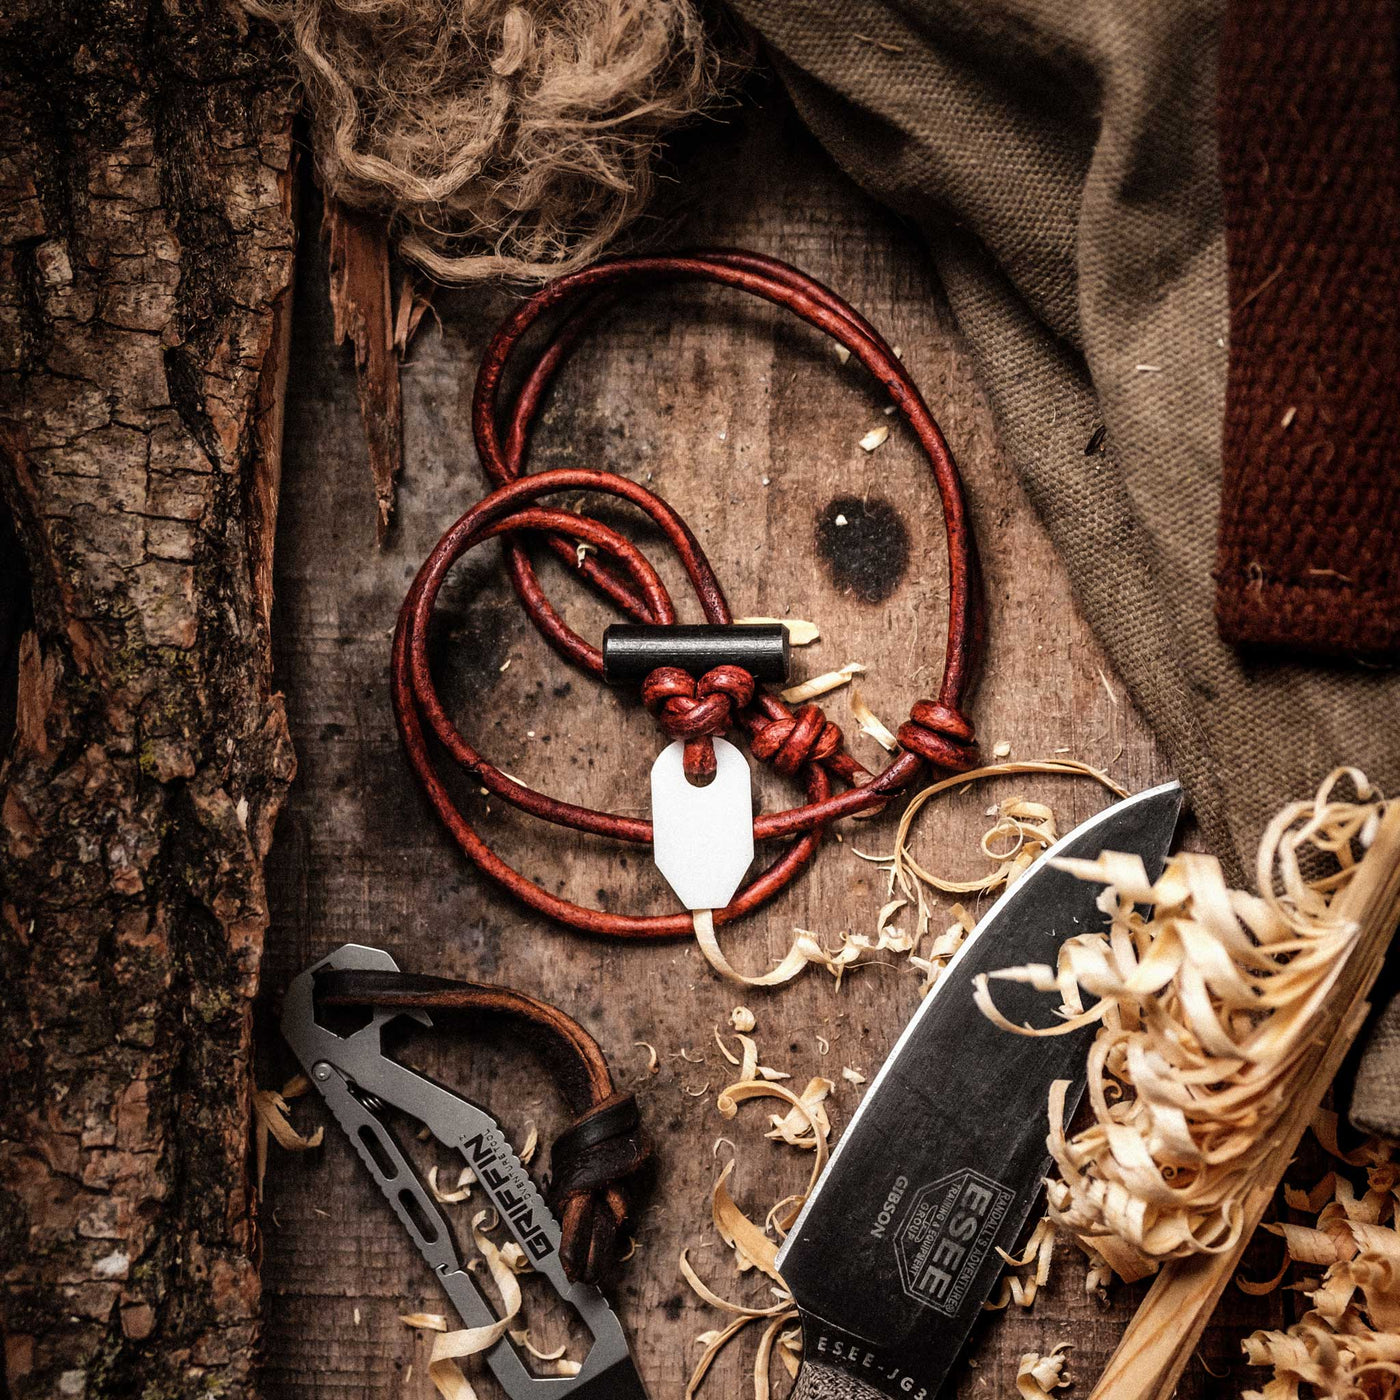 Wazoo Bushcraft Necklace shown with griffin adventure pocket tool and ESEE JG3 knife